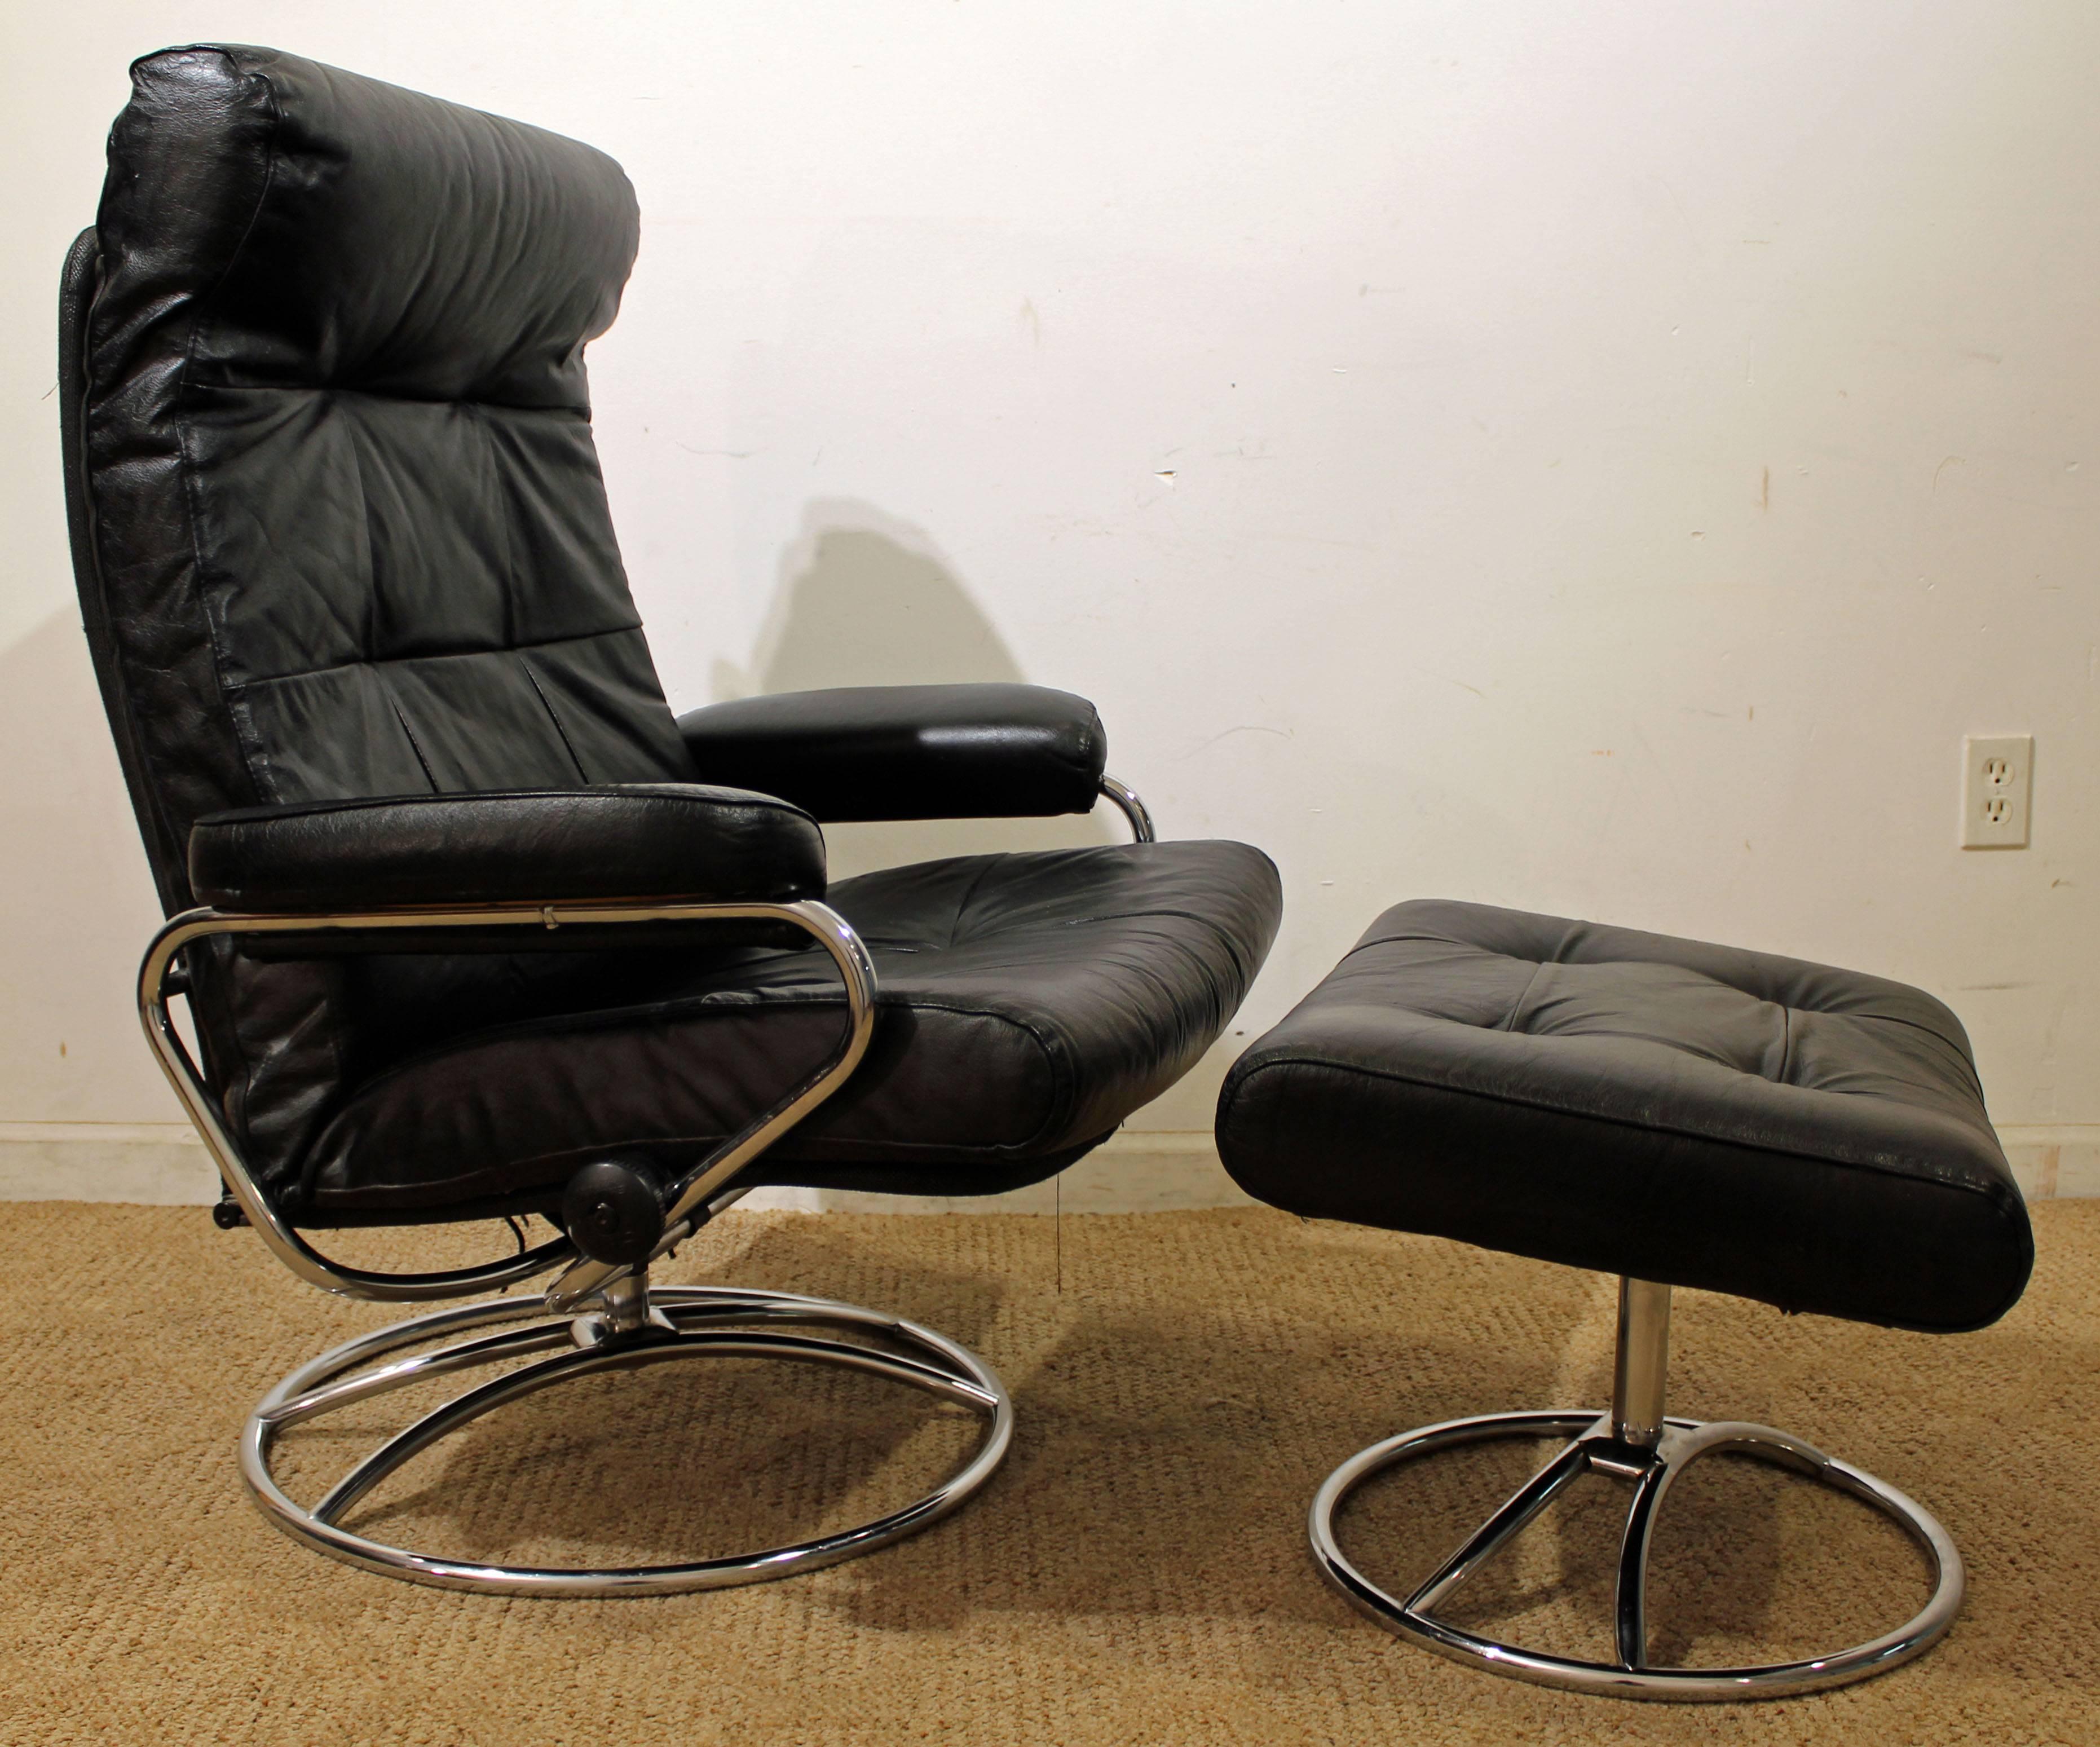 What a find. Offered is a Mid-Century Modern lounge chair, made by Ekornes 